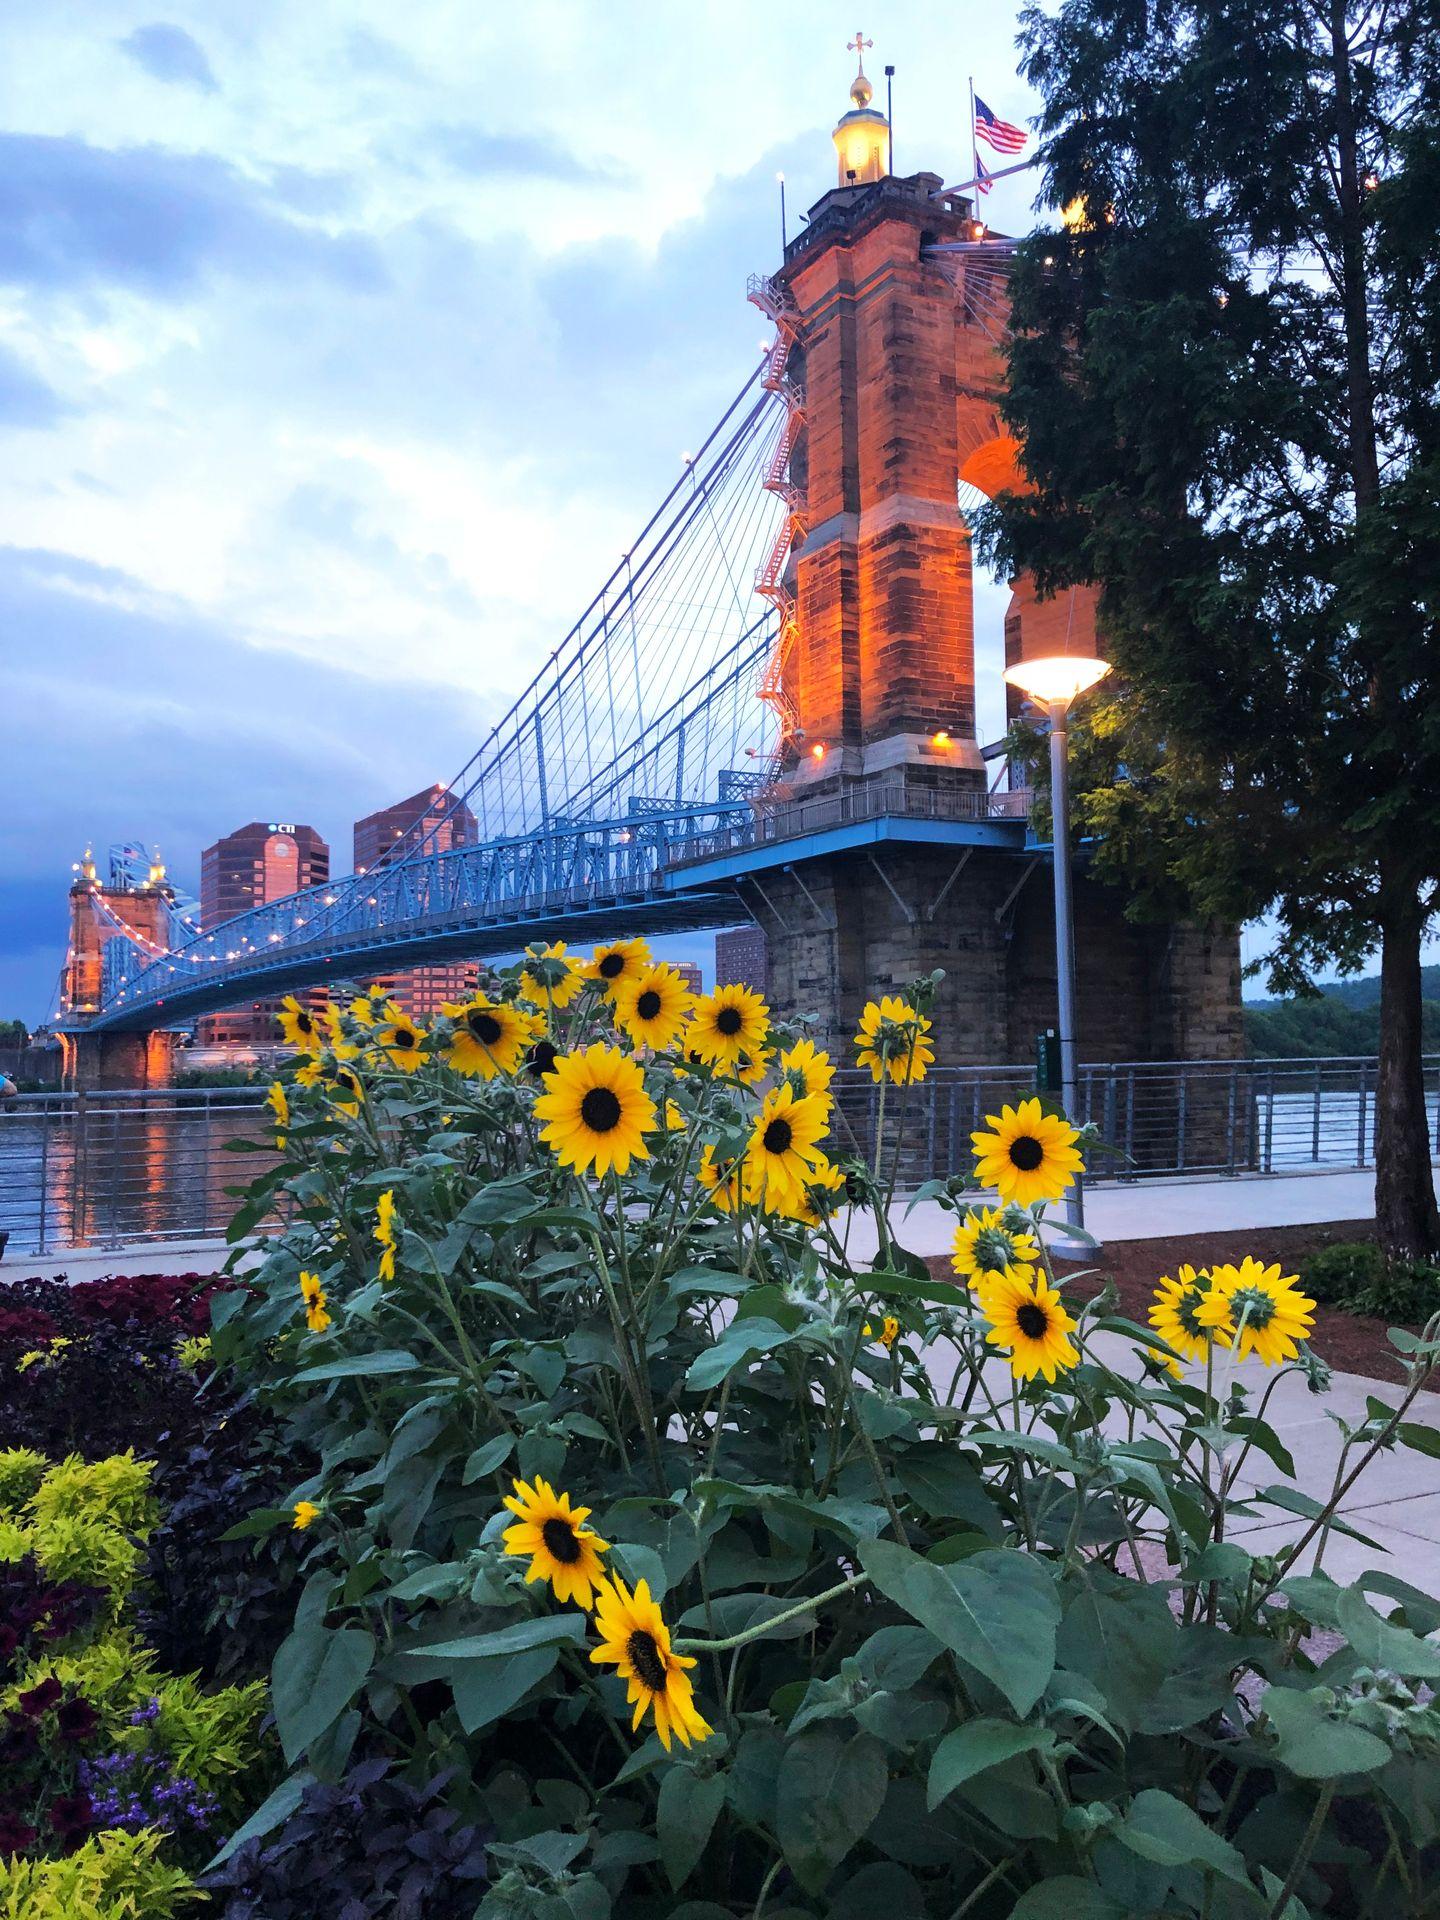 A photo of sunflowers with the Roebling Suspension Bridge in the background.